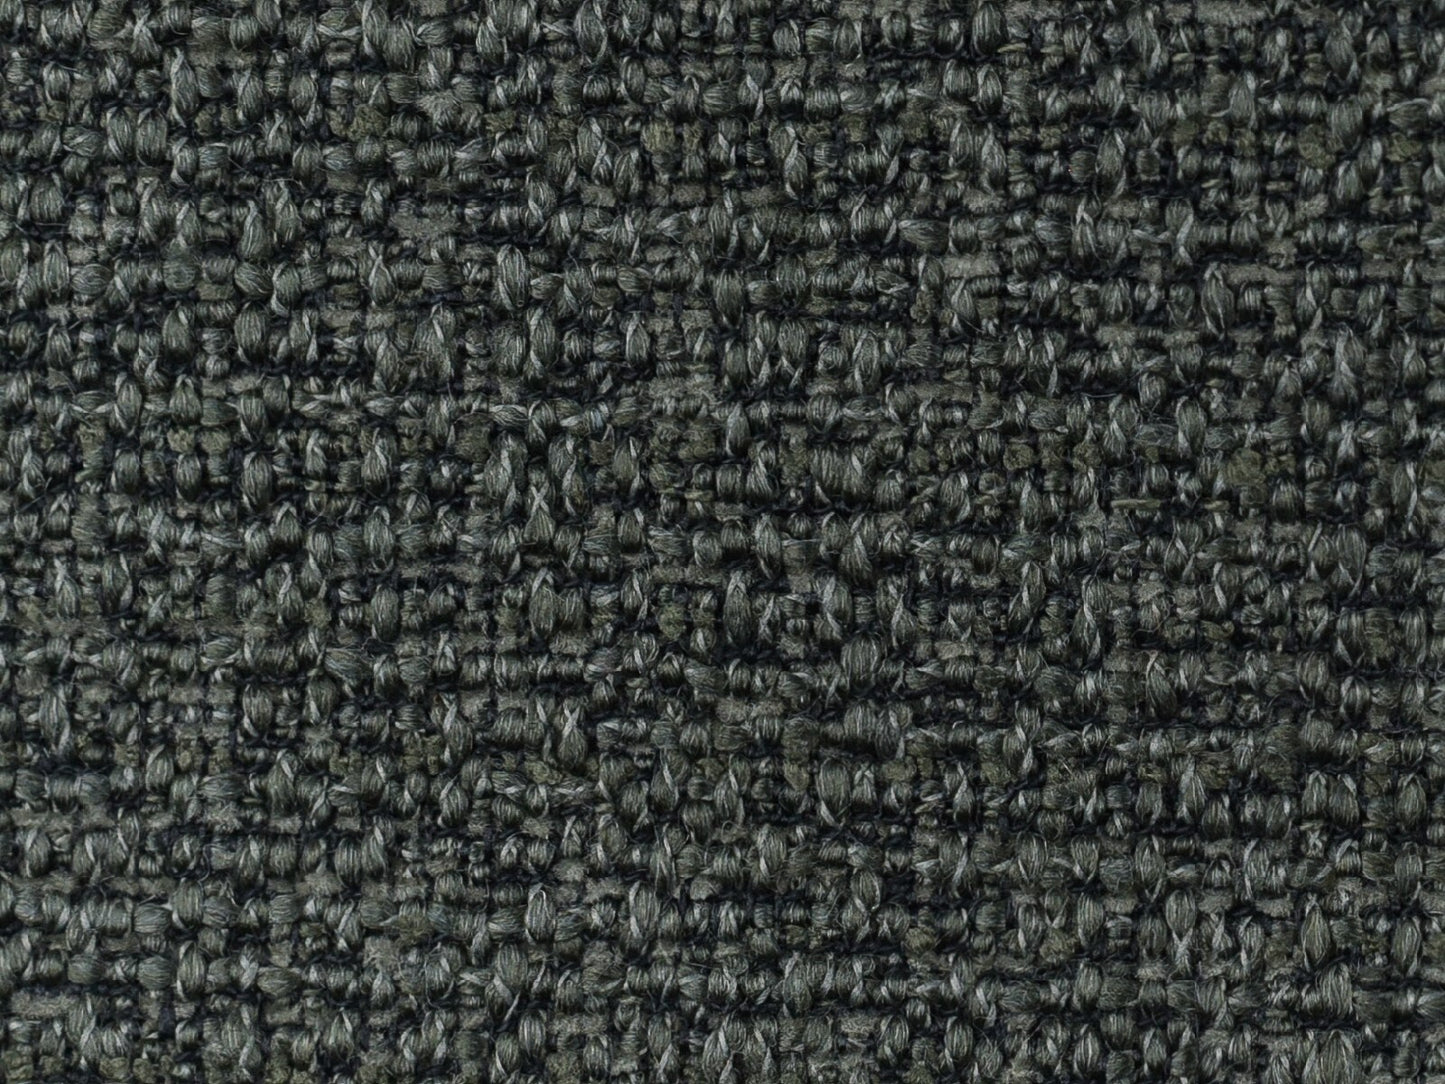 Contemporary Coarse Woven Textured Upholstery Fabric By The Yard 57"W/600GSM-Capability Beetle